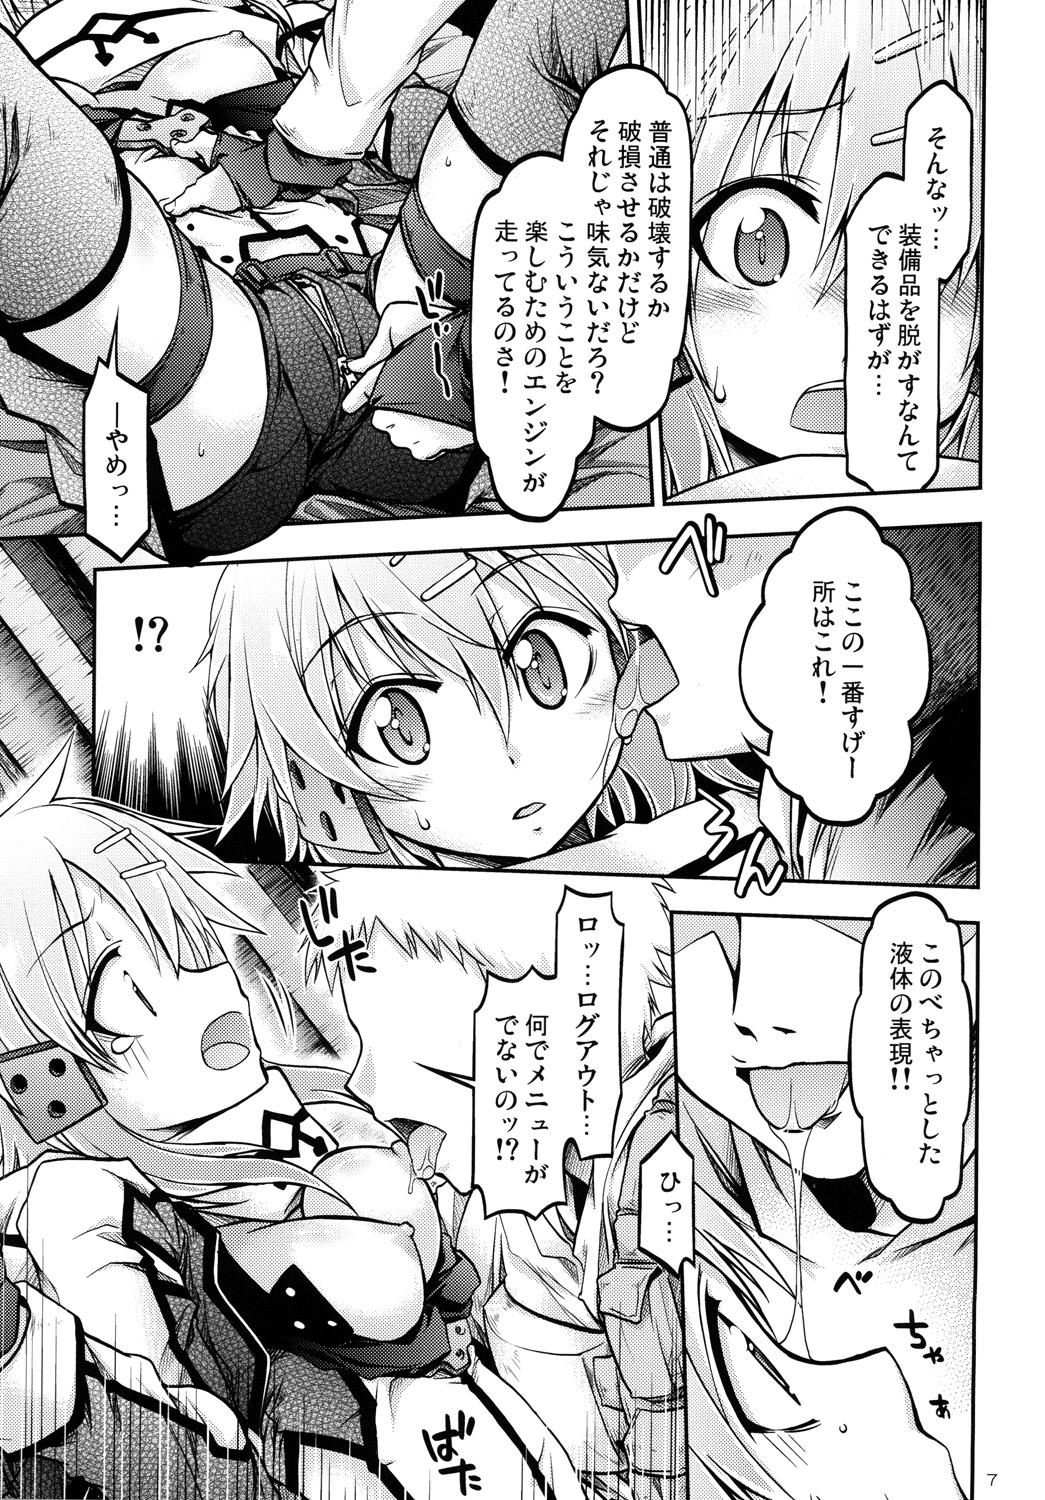 Yanks Featured Gspot - Sword art online Gay Physicals - Page 6